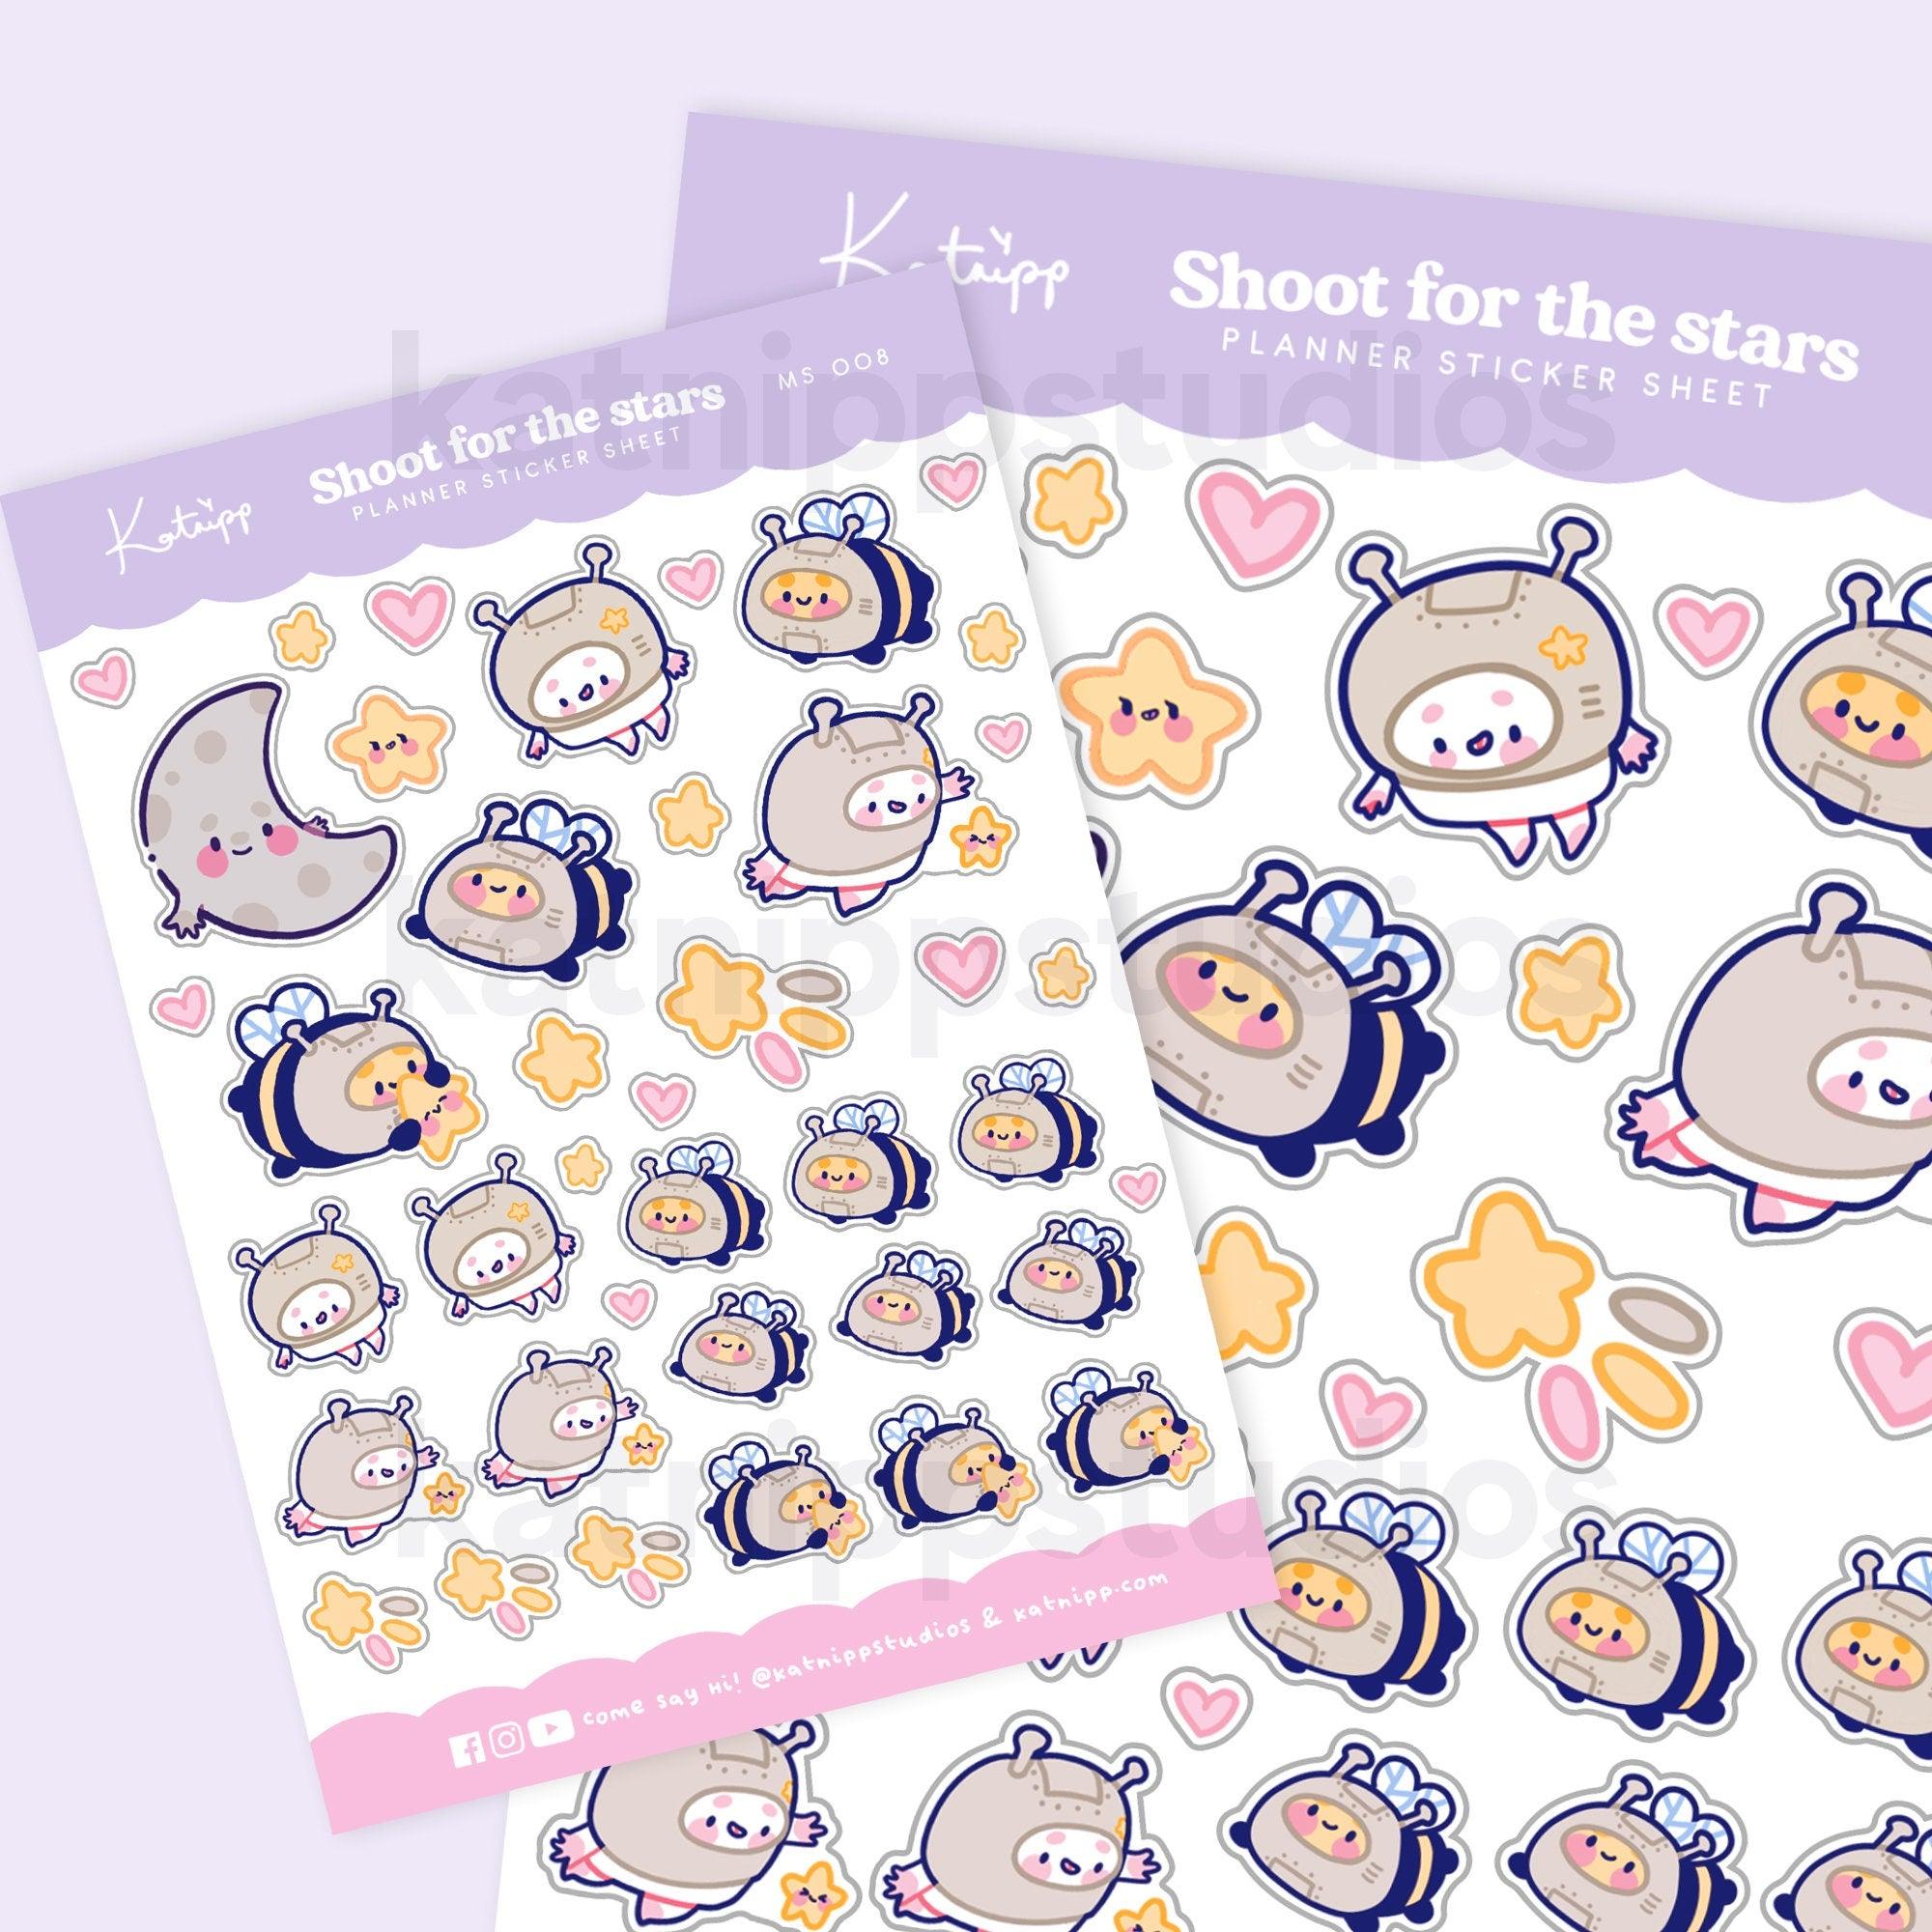 mage of Bumblebutt and Marshie celestial planner stickers (MS 008) on a white background. 2